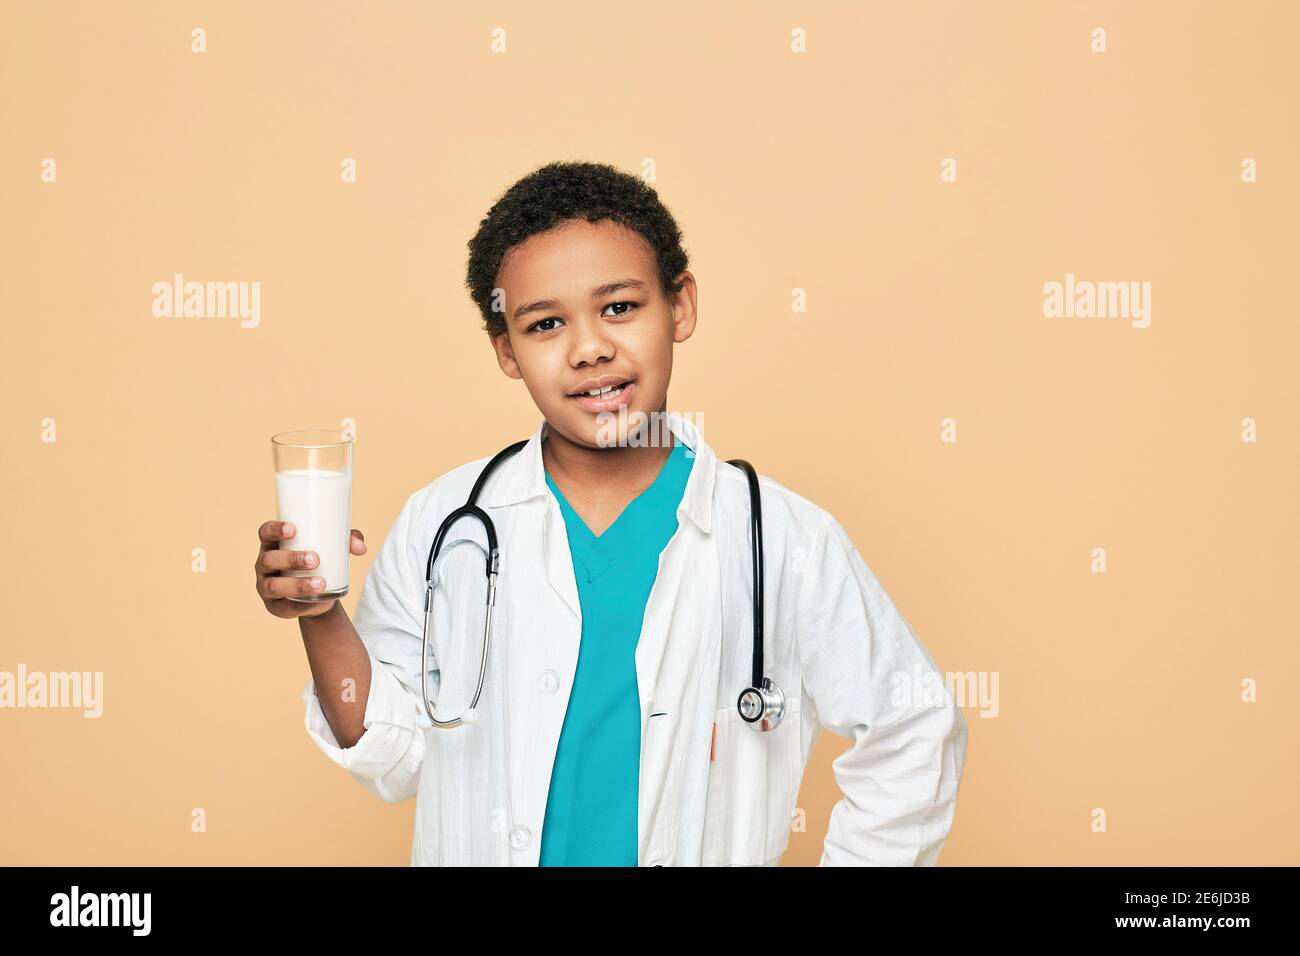 Benefits of milk for kids. African American male kid dressed like a doctor holding a glass of milk Stock Photo